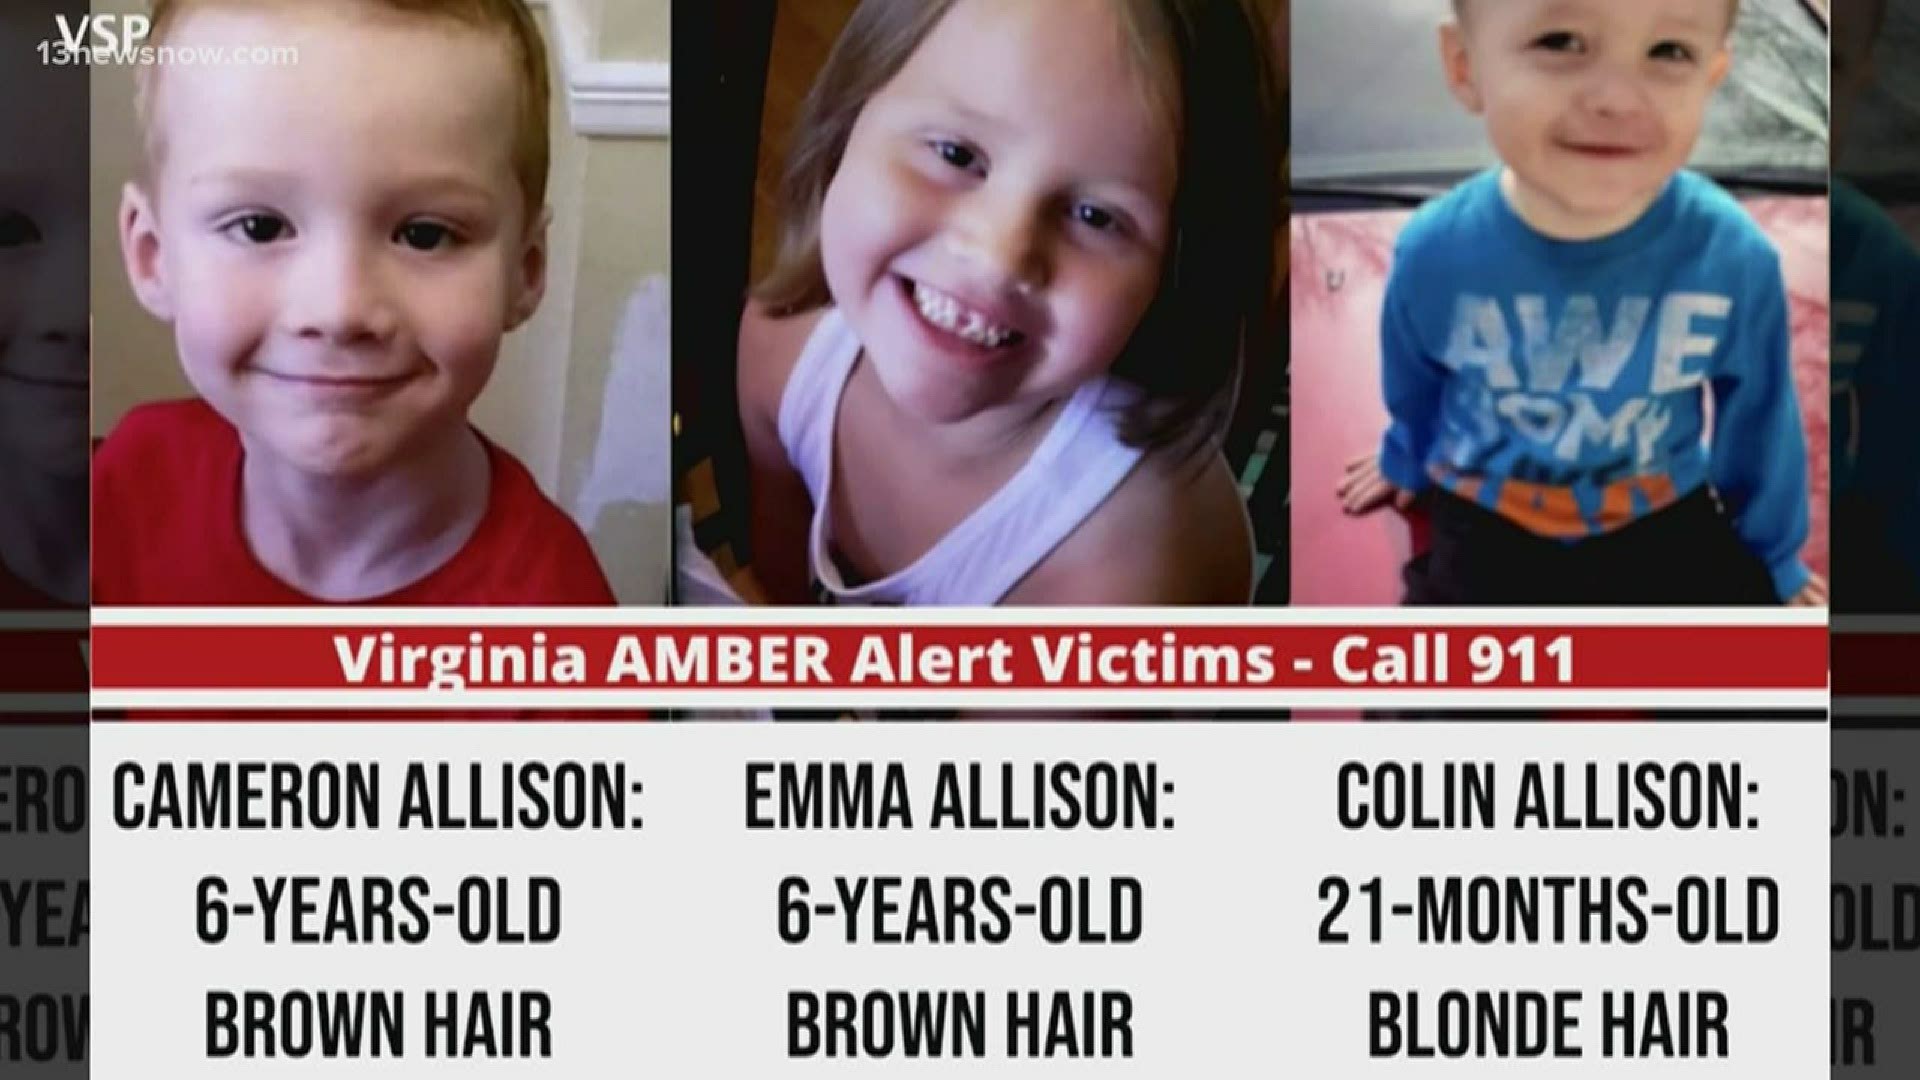 Police took John Allison and his wife, Ruby, into custody after three children were abducted out of Roanoke County. All three kids have been found and are safe.